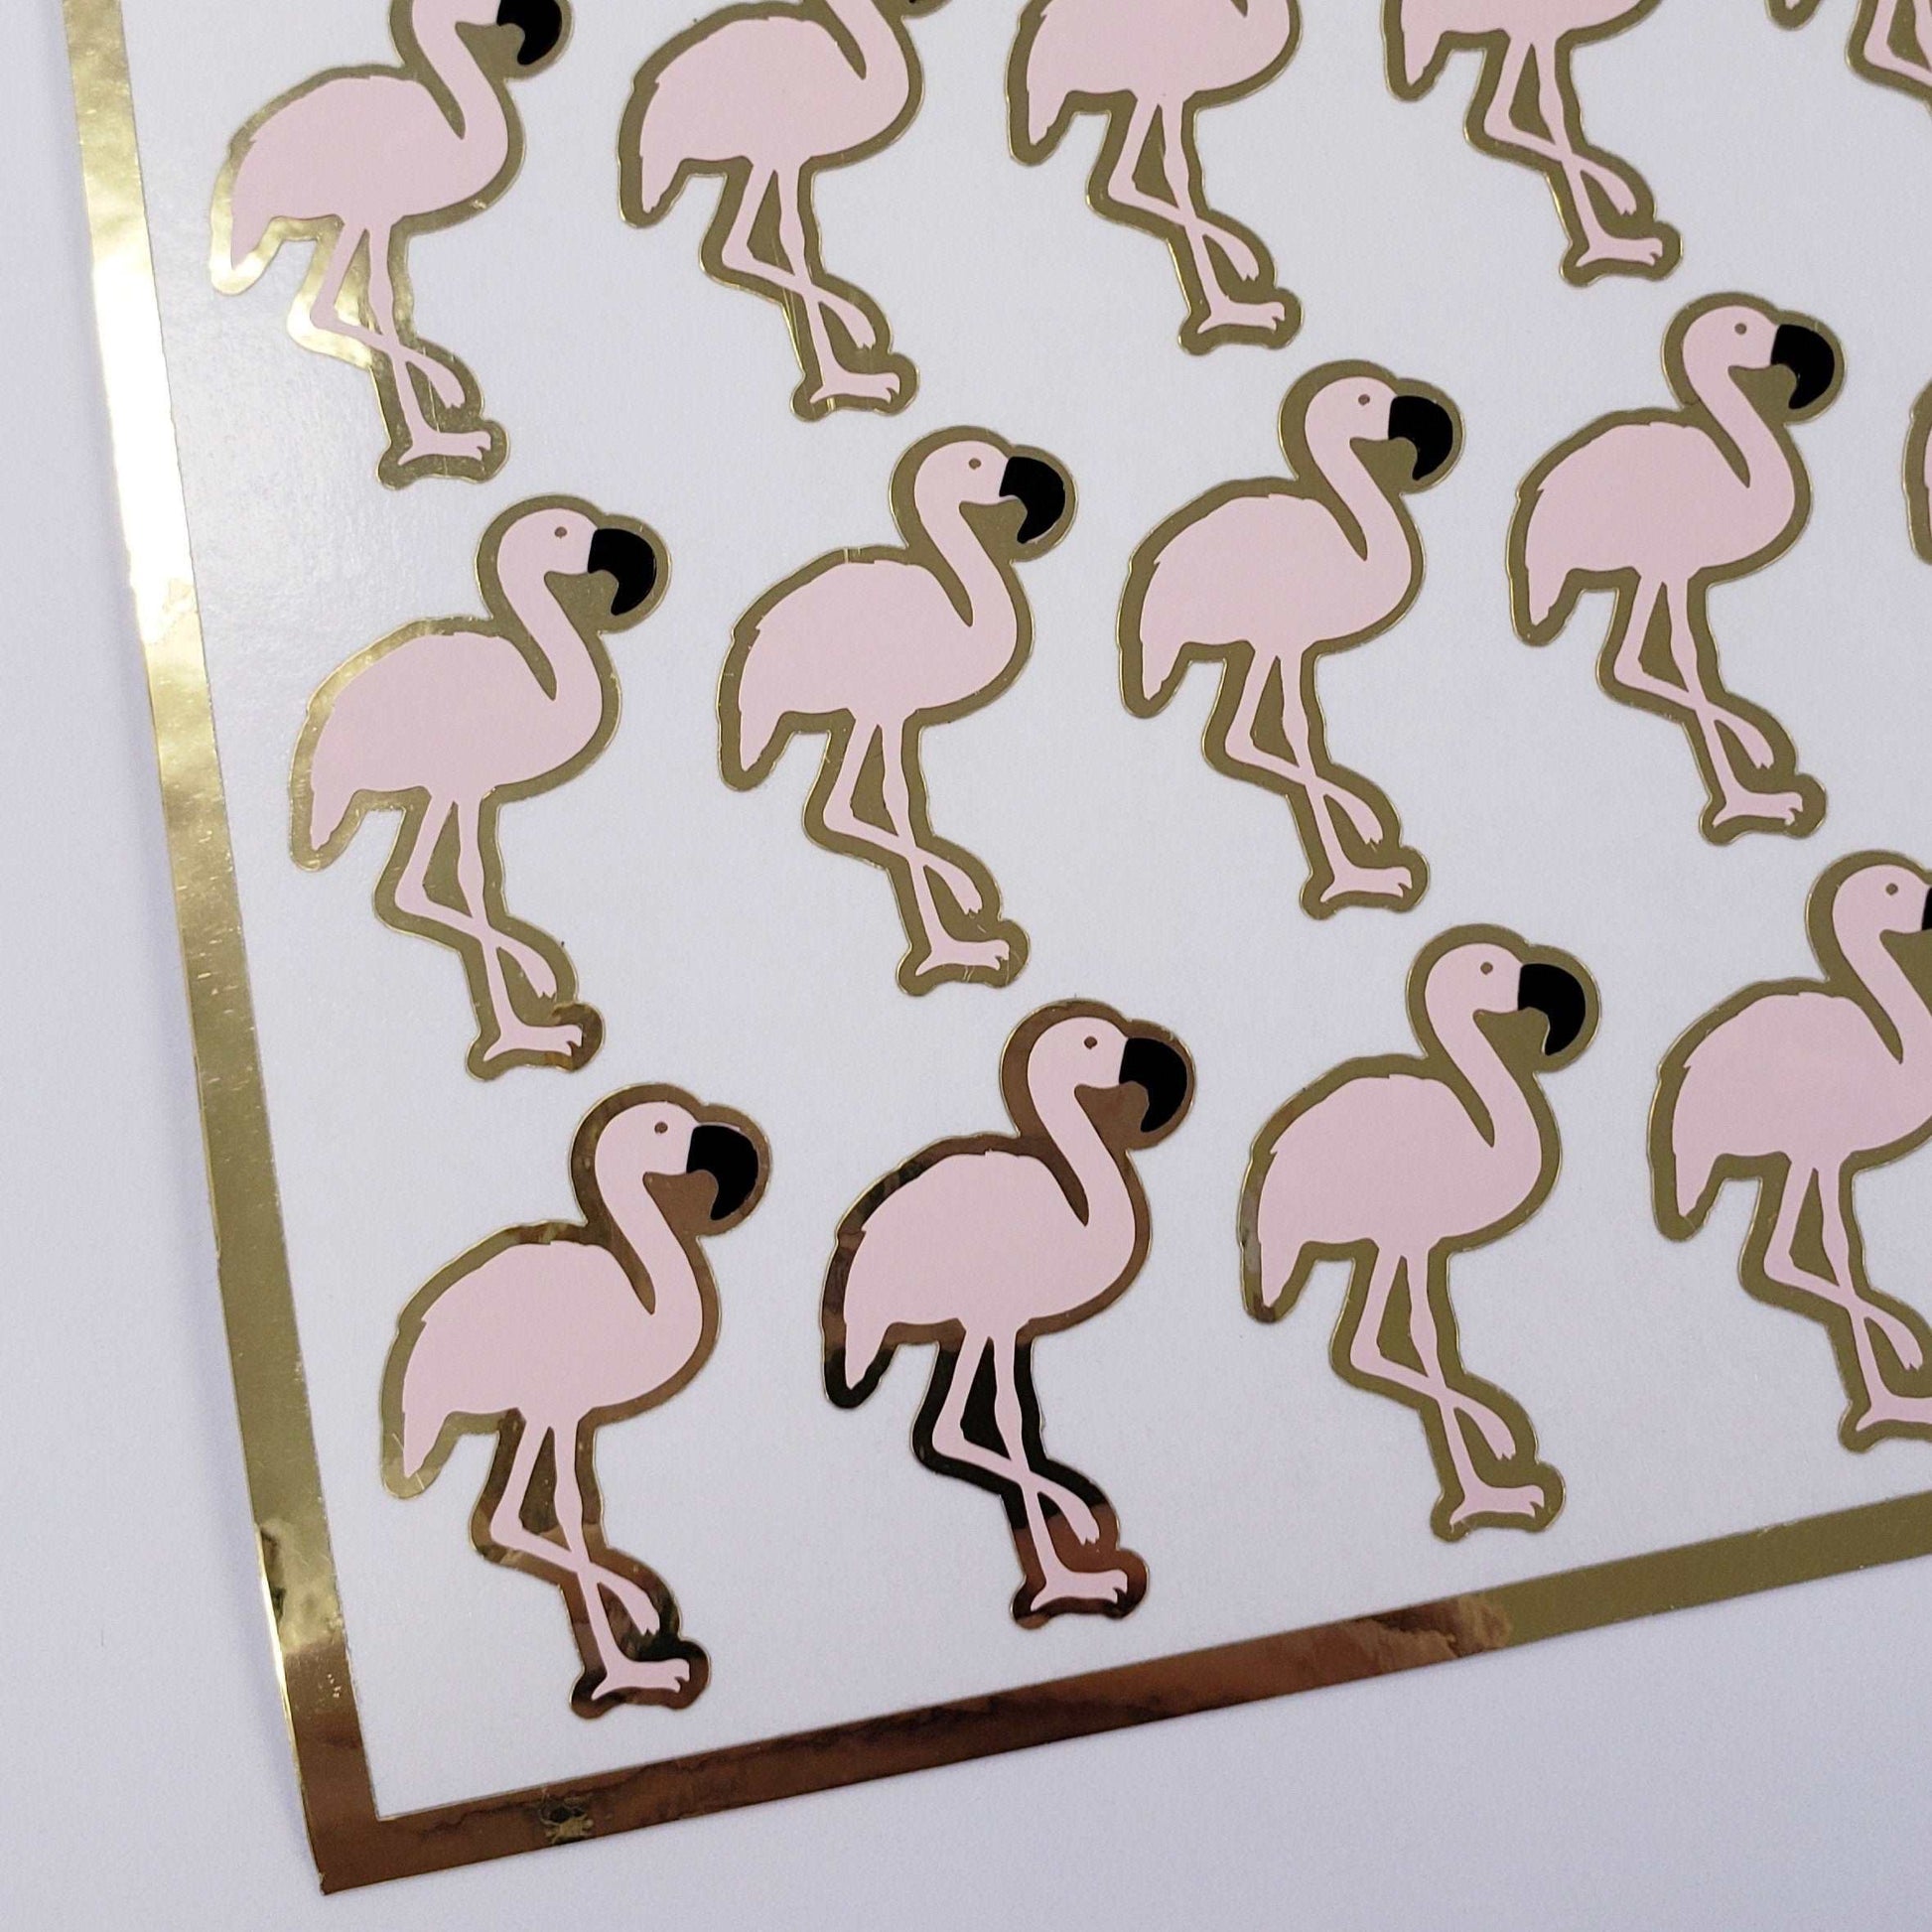 Flamingo Stickers, set of 25 blush pink and gold bird stickers for tropical themed parties, weddings and baby showers. Waterproof decals.